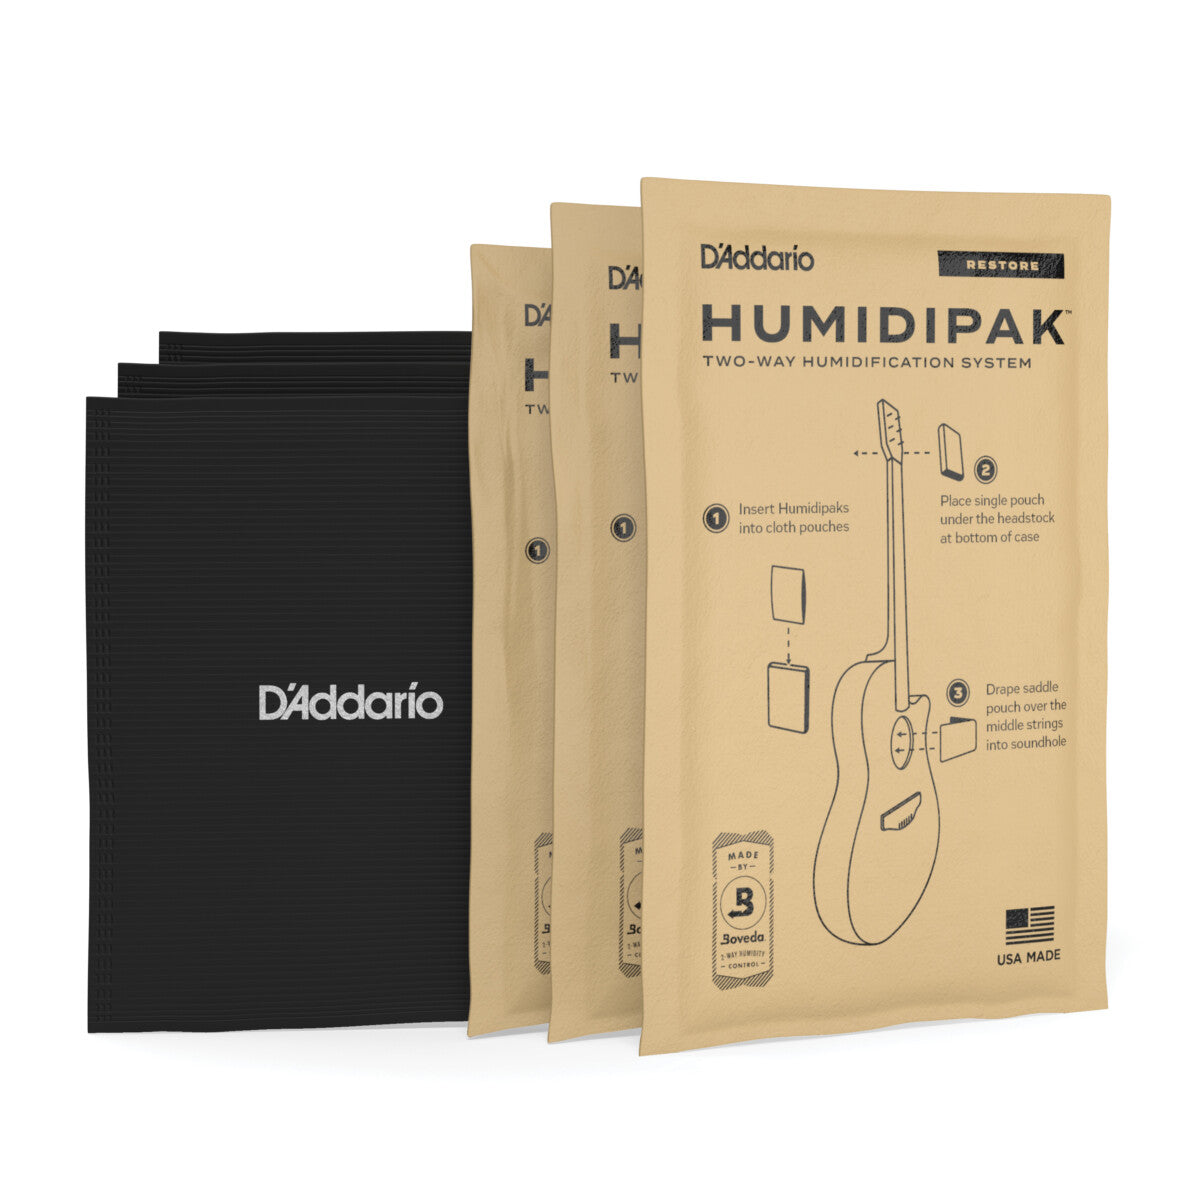 D'Addario Humidipak Humidity Control System Replacement Packets